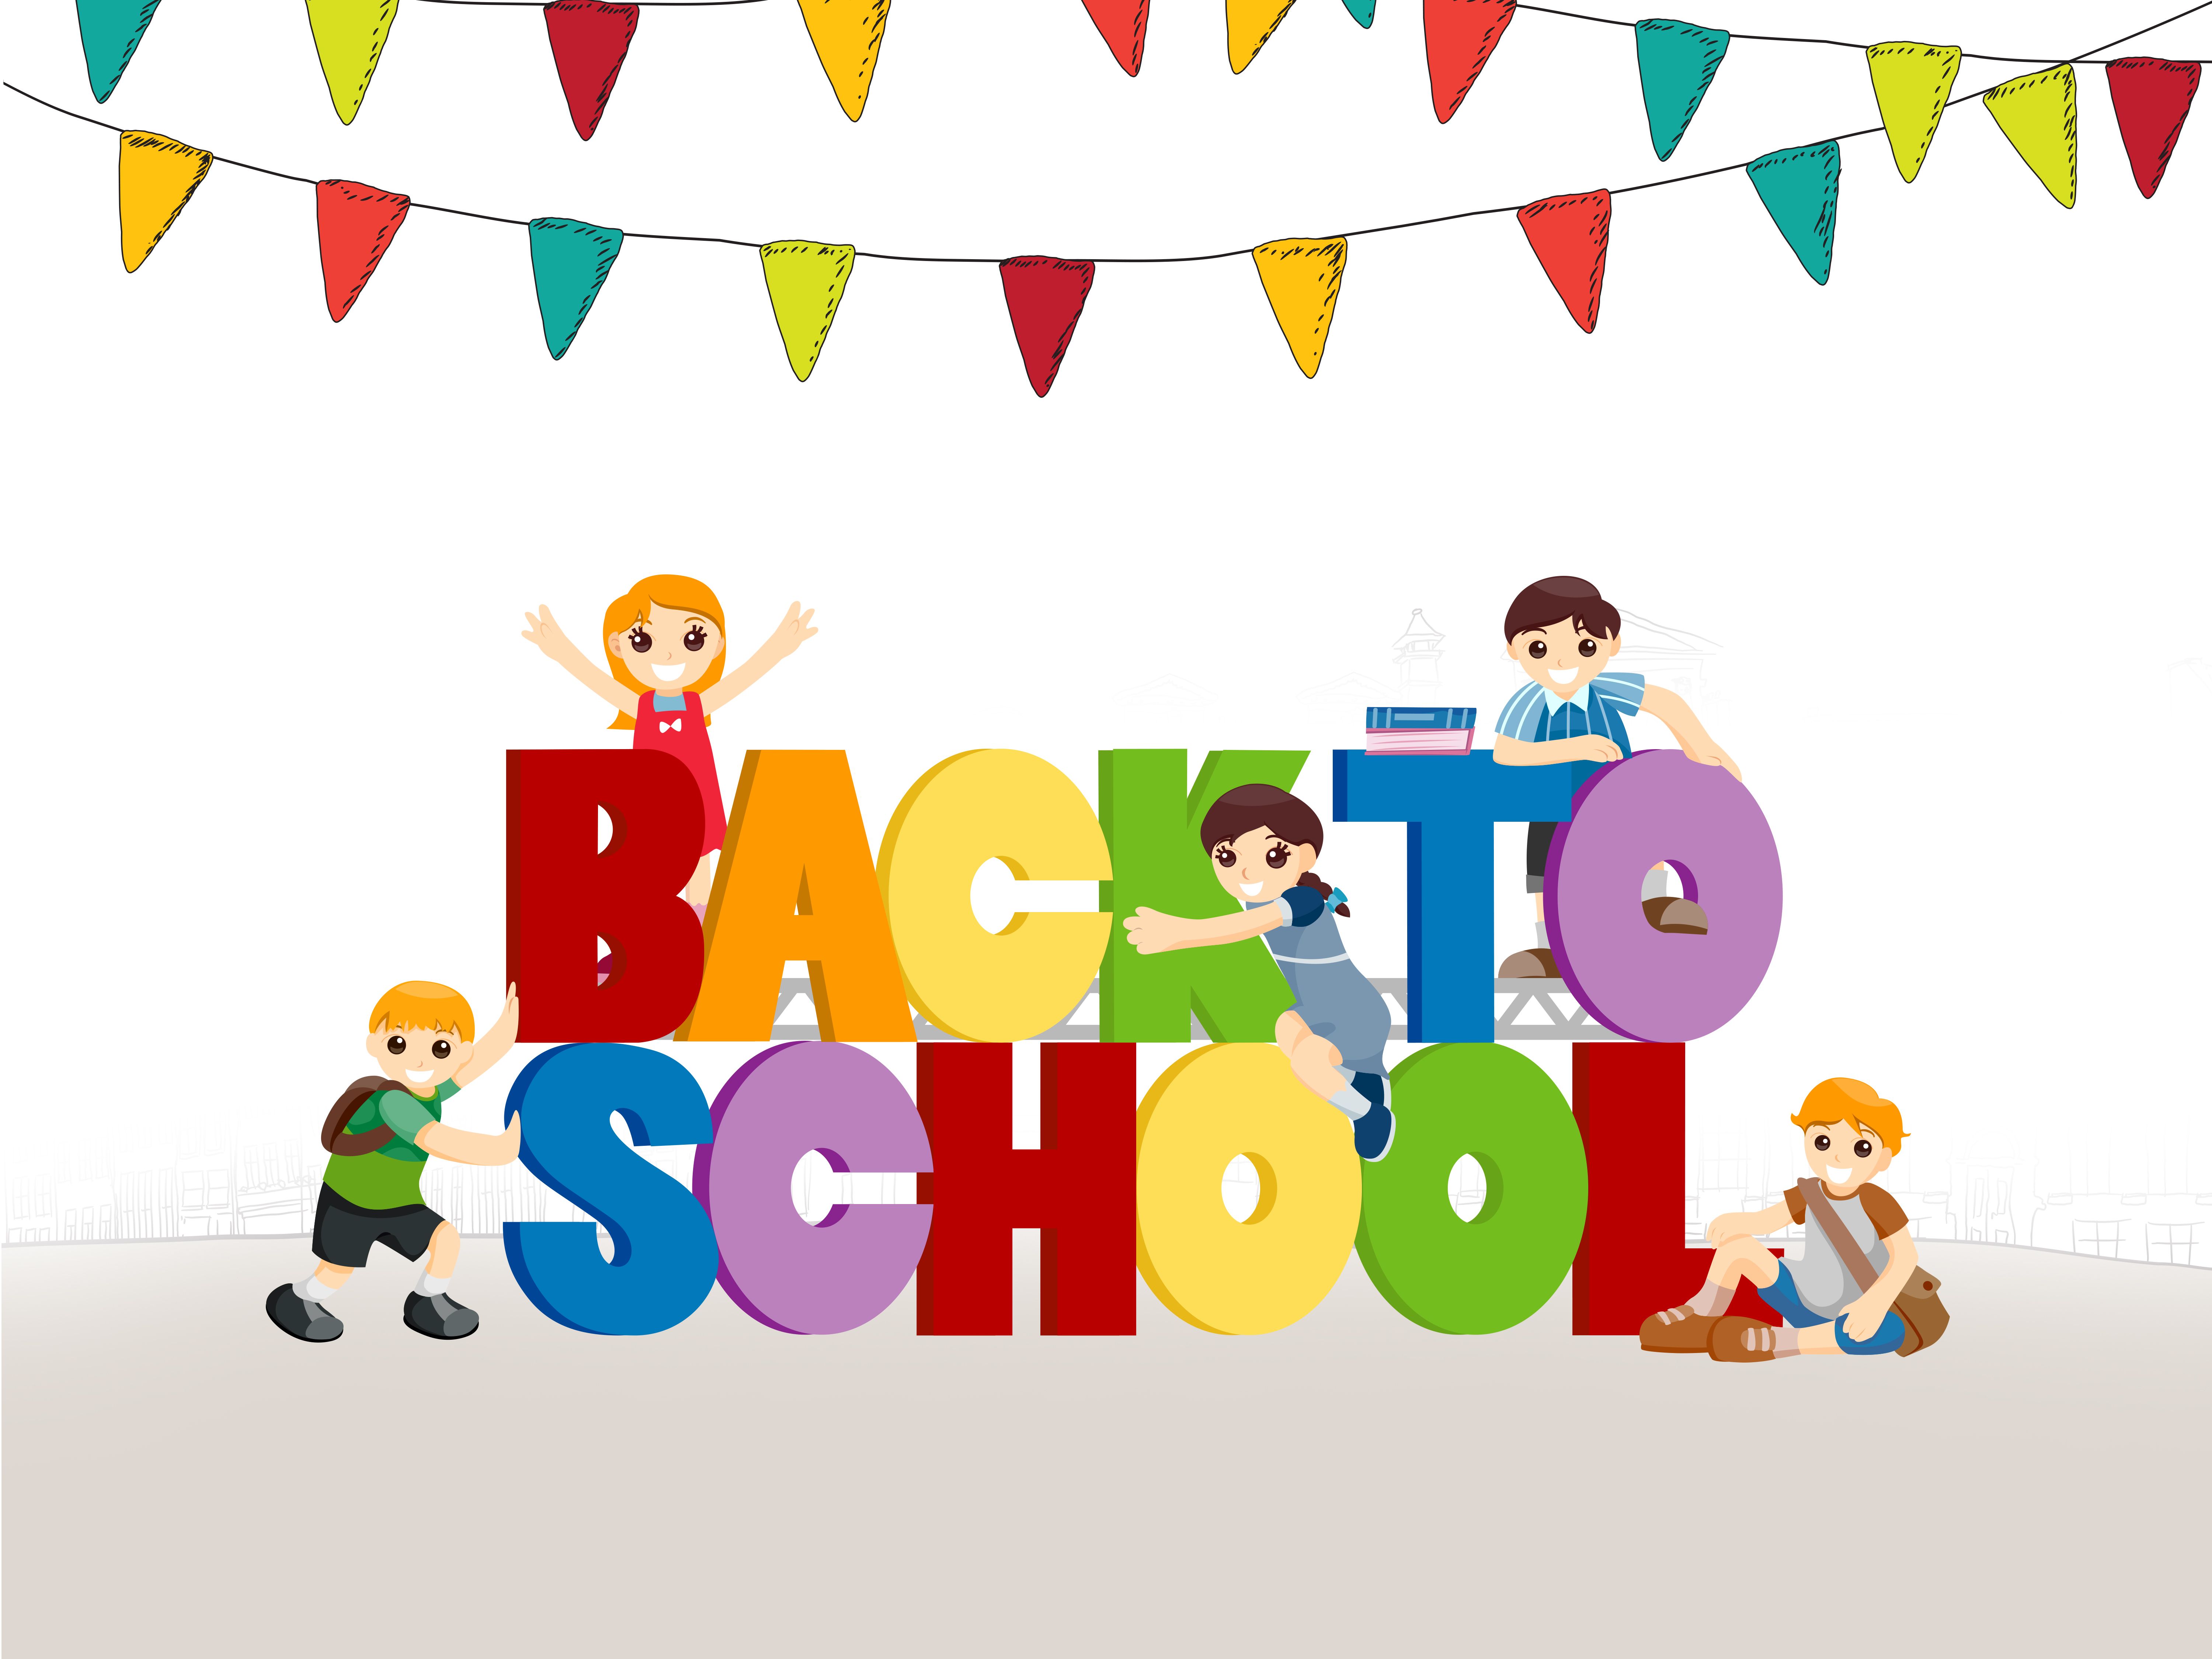 Welcome Back to School Wallpaper Free Welcome Back to School Background